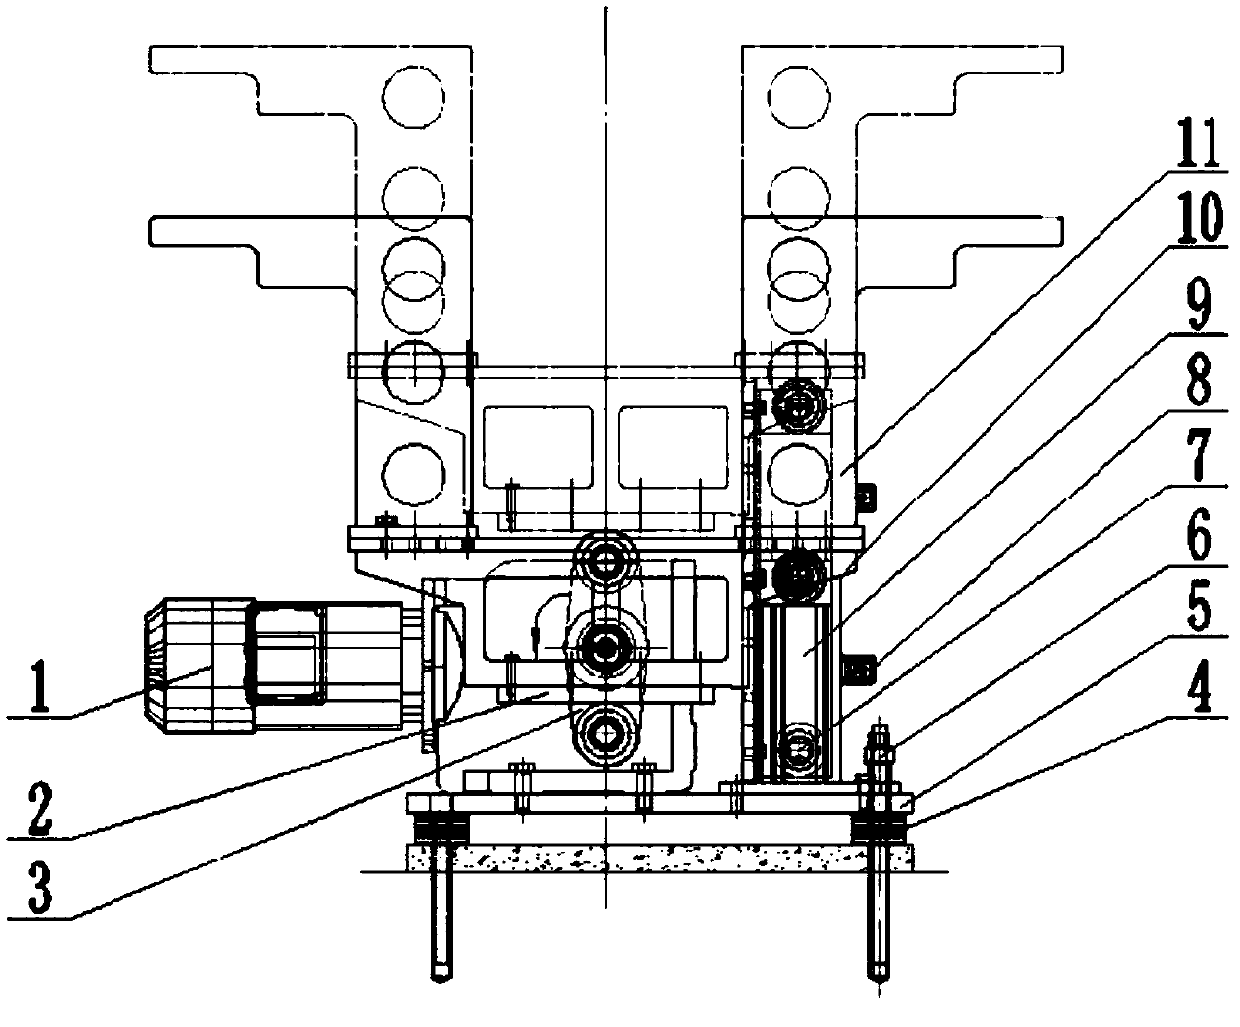 A wheel jacking mechanism applied to high-speed rail wheel production line